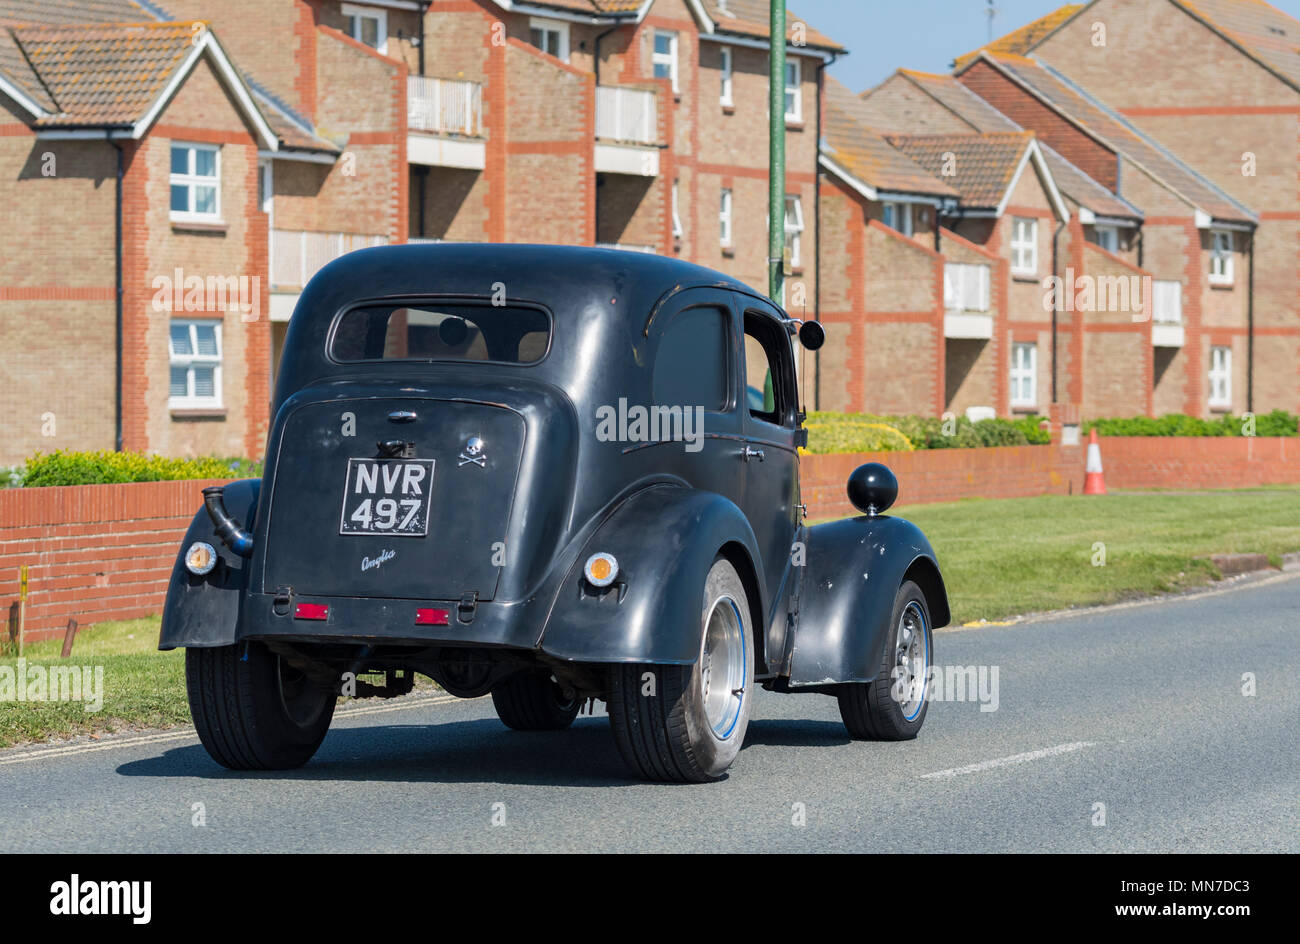 Black vintage Ford Anglia car from 1953, converted to a Hot Rod, in England, UK. Classic car. Stock Photo